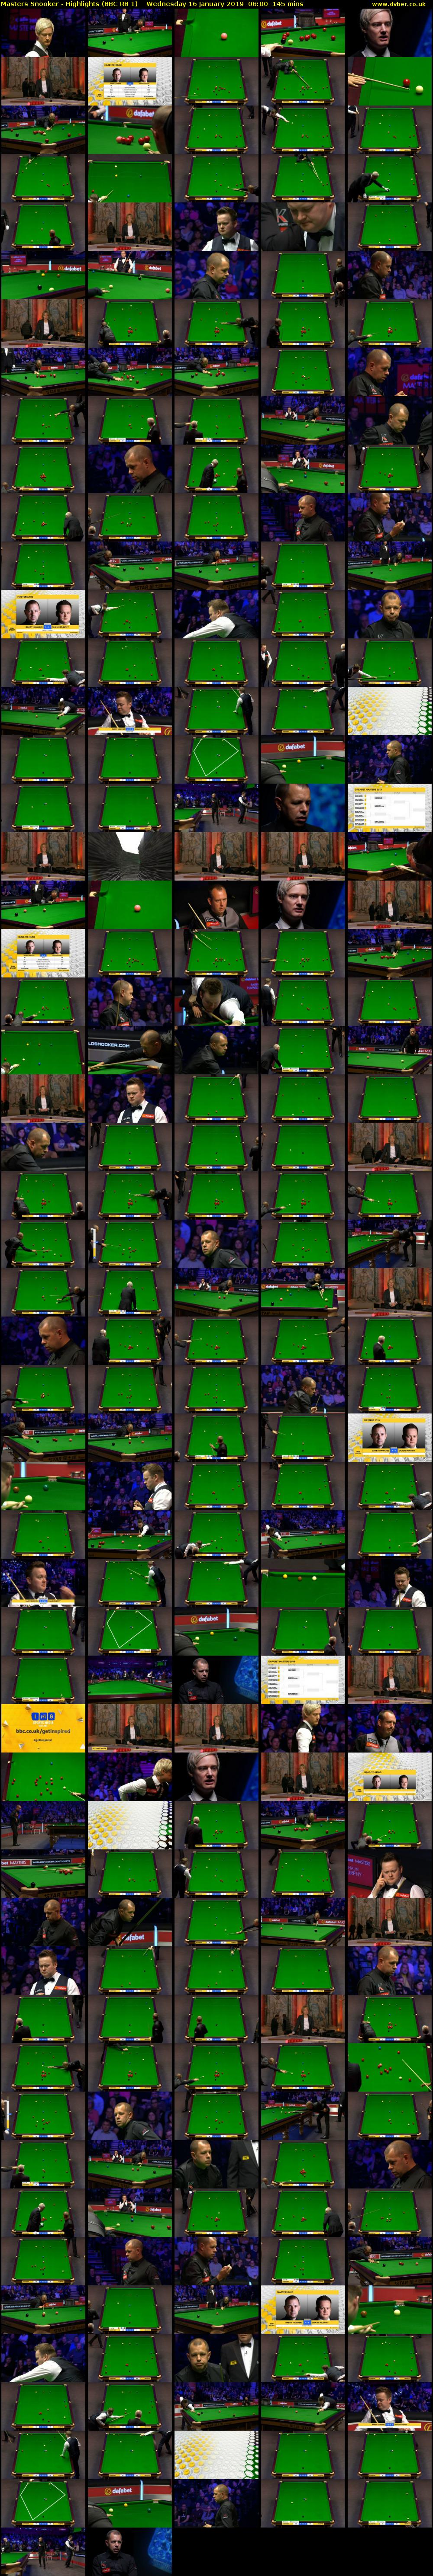 Masters Snooker - Highlights (BBC RB 1) Wednesday 16 January 2019 06:00 - 08:25